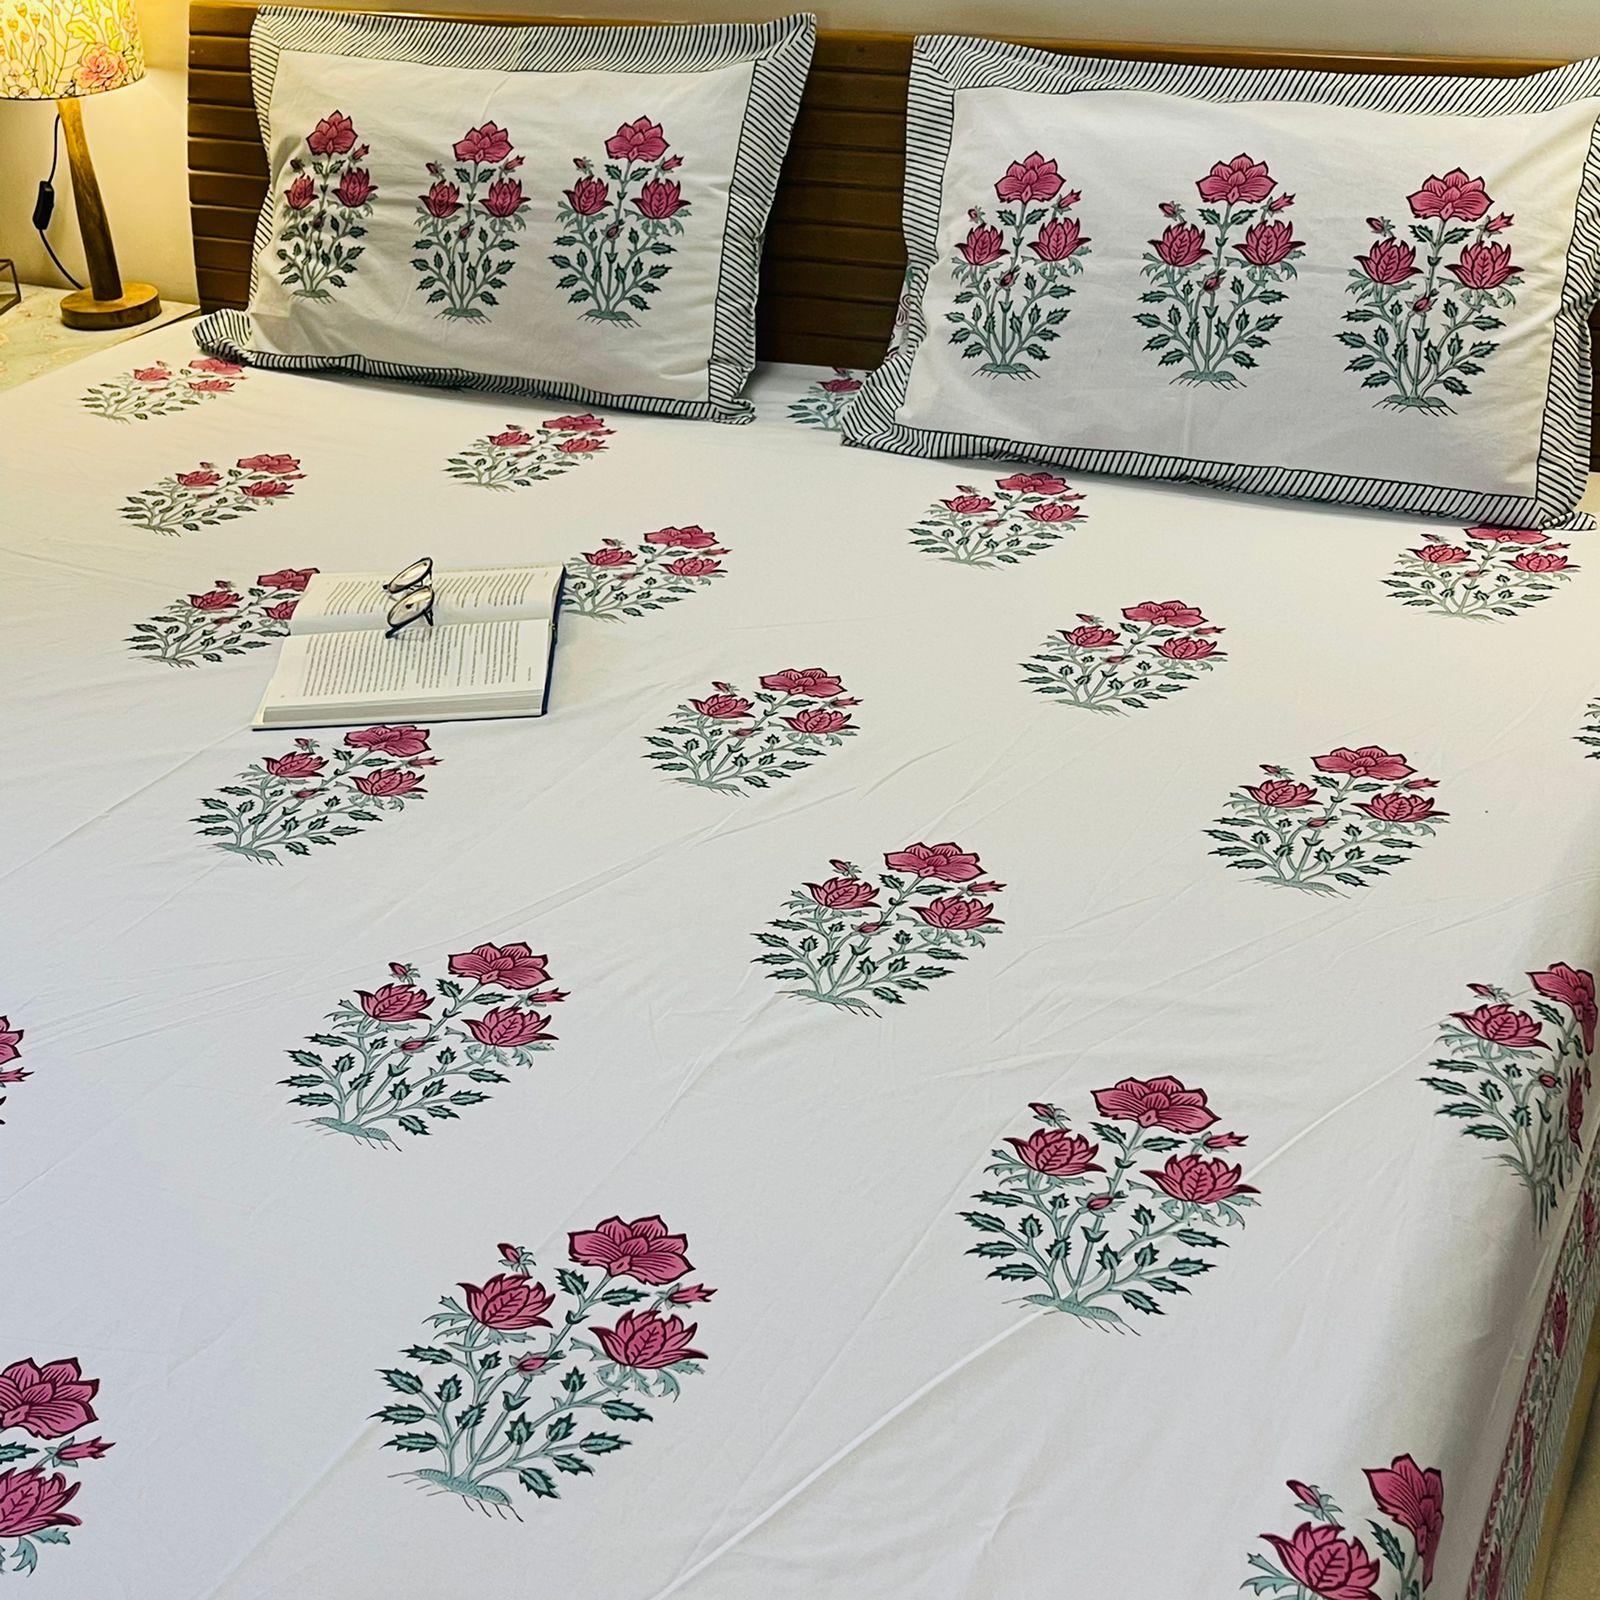 White Floral Premium Cotton Bedsheet (Queen Size) with Pillow Covers